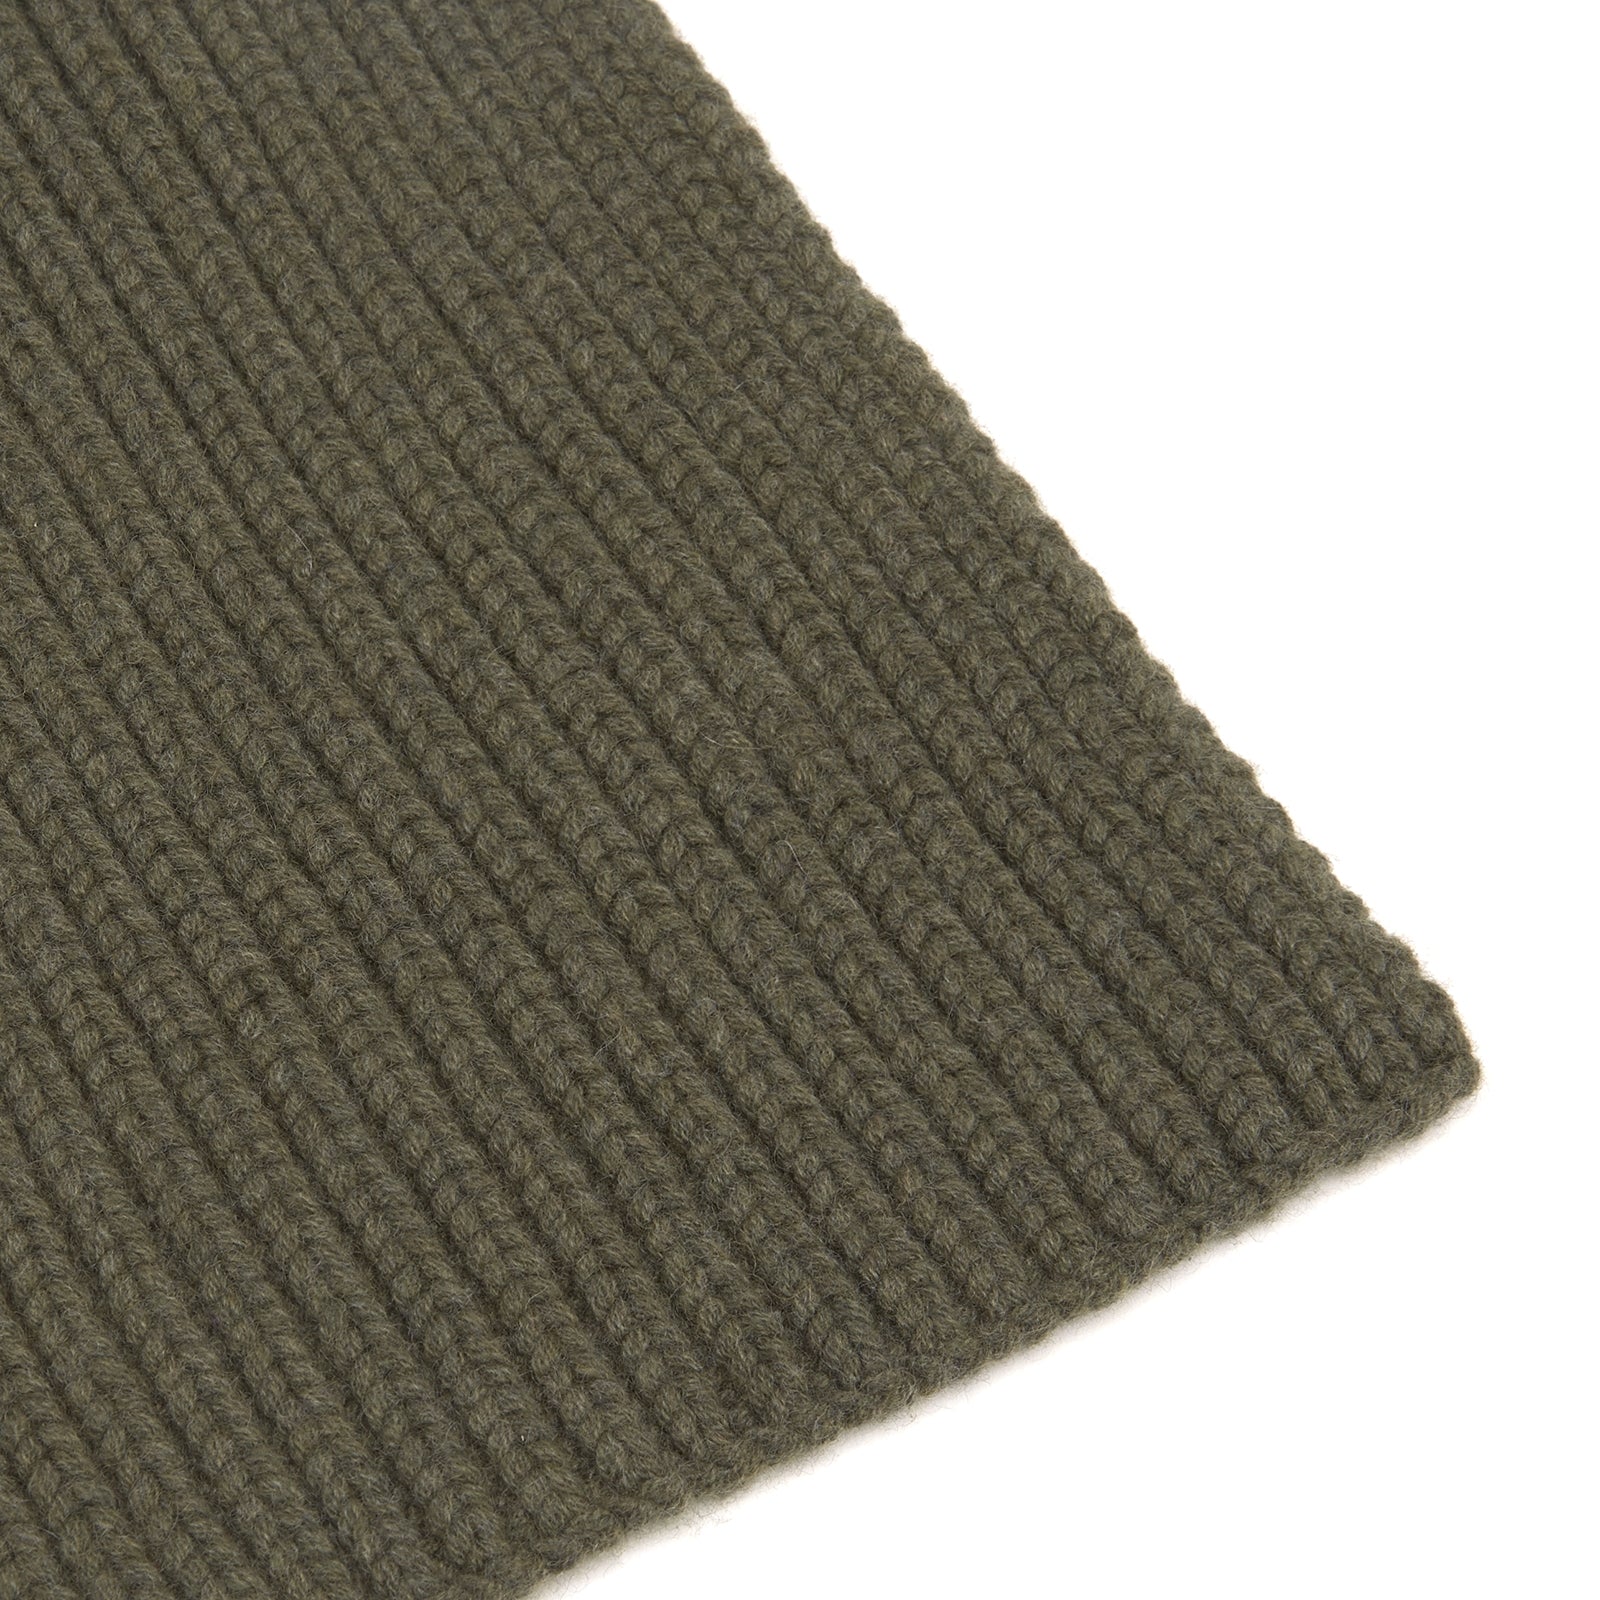 Khaki Green Knitted Cashmere Scarf